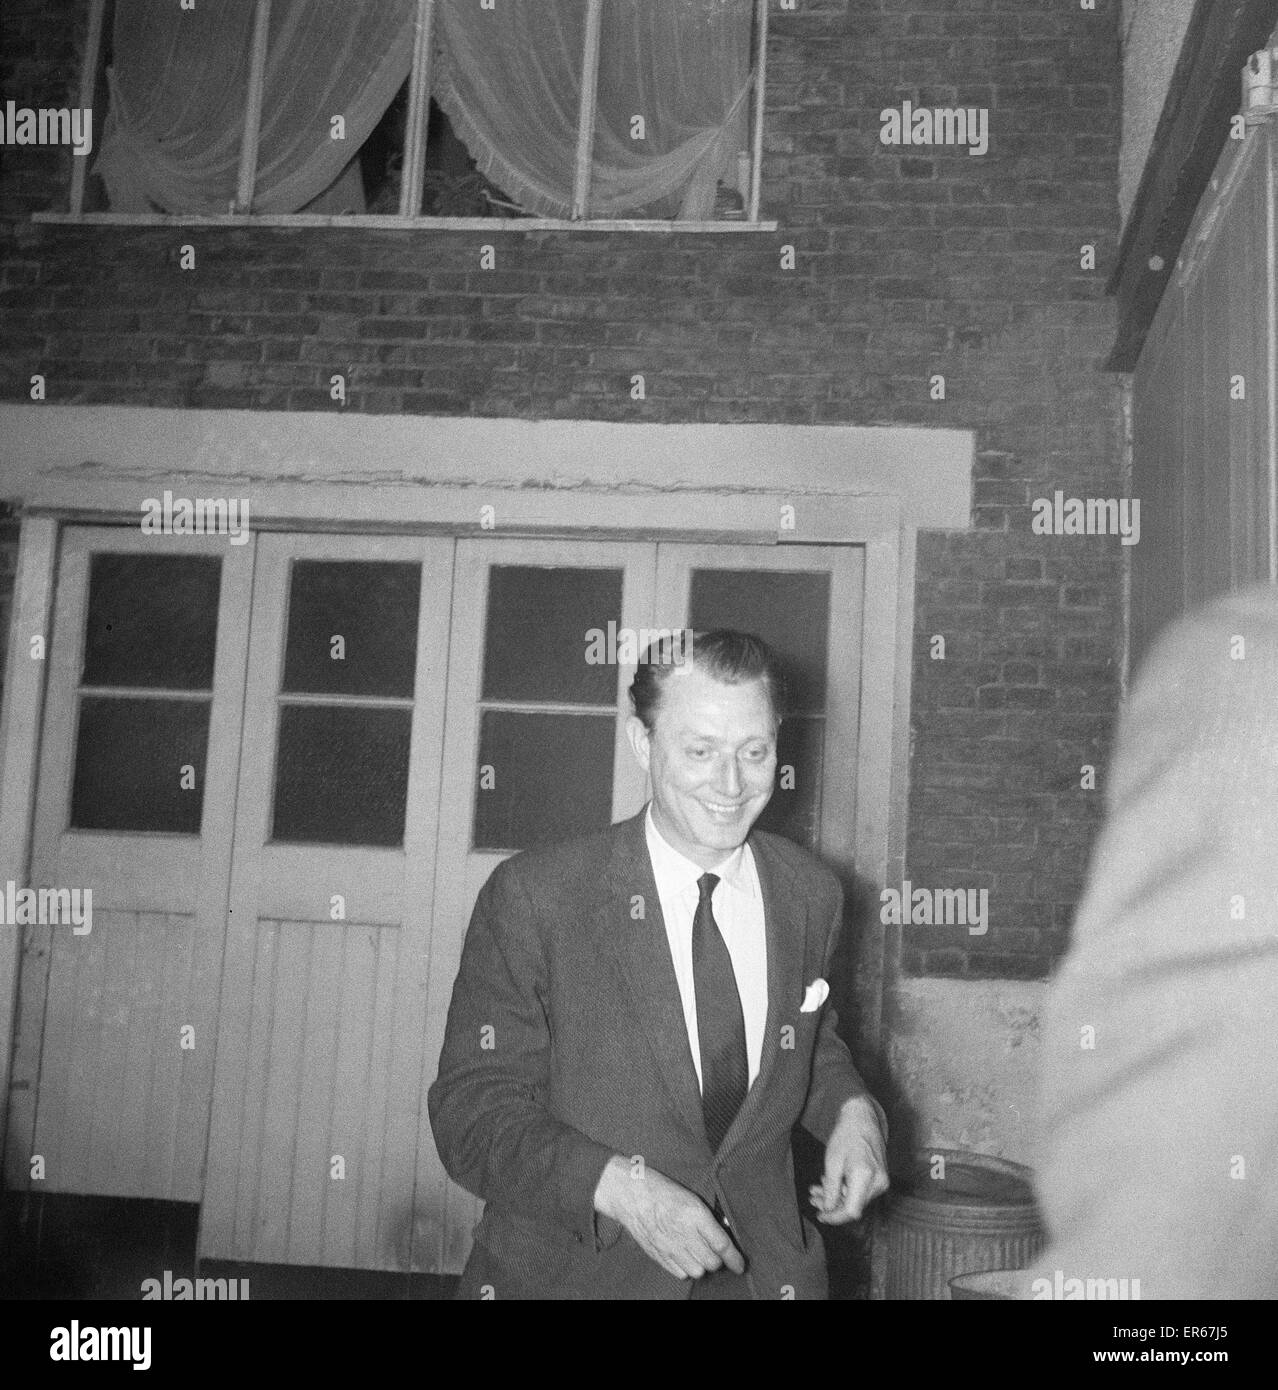 Dr Stephen Ward, pictured leaving his flat, Bryanston Mews West, Marylebone, London, 22nd June 1963.  Dr Stephen Ward osteopath and artist who became notorious as one of the central figures in the 1963 Profumo affair, a British public scandal which profou Stock Photo